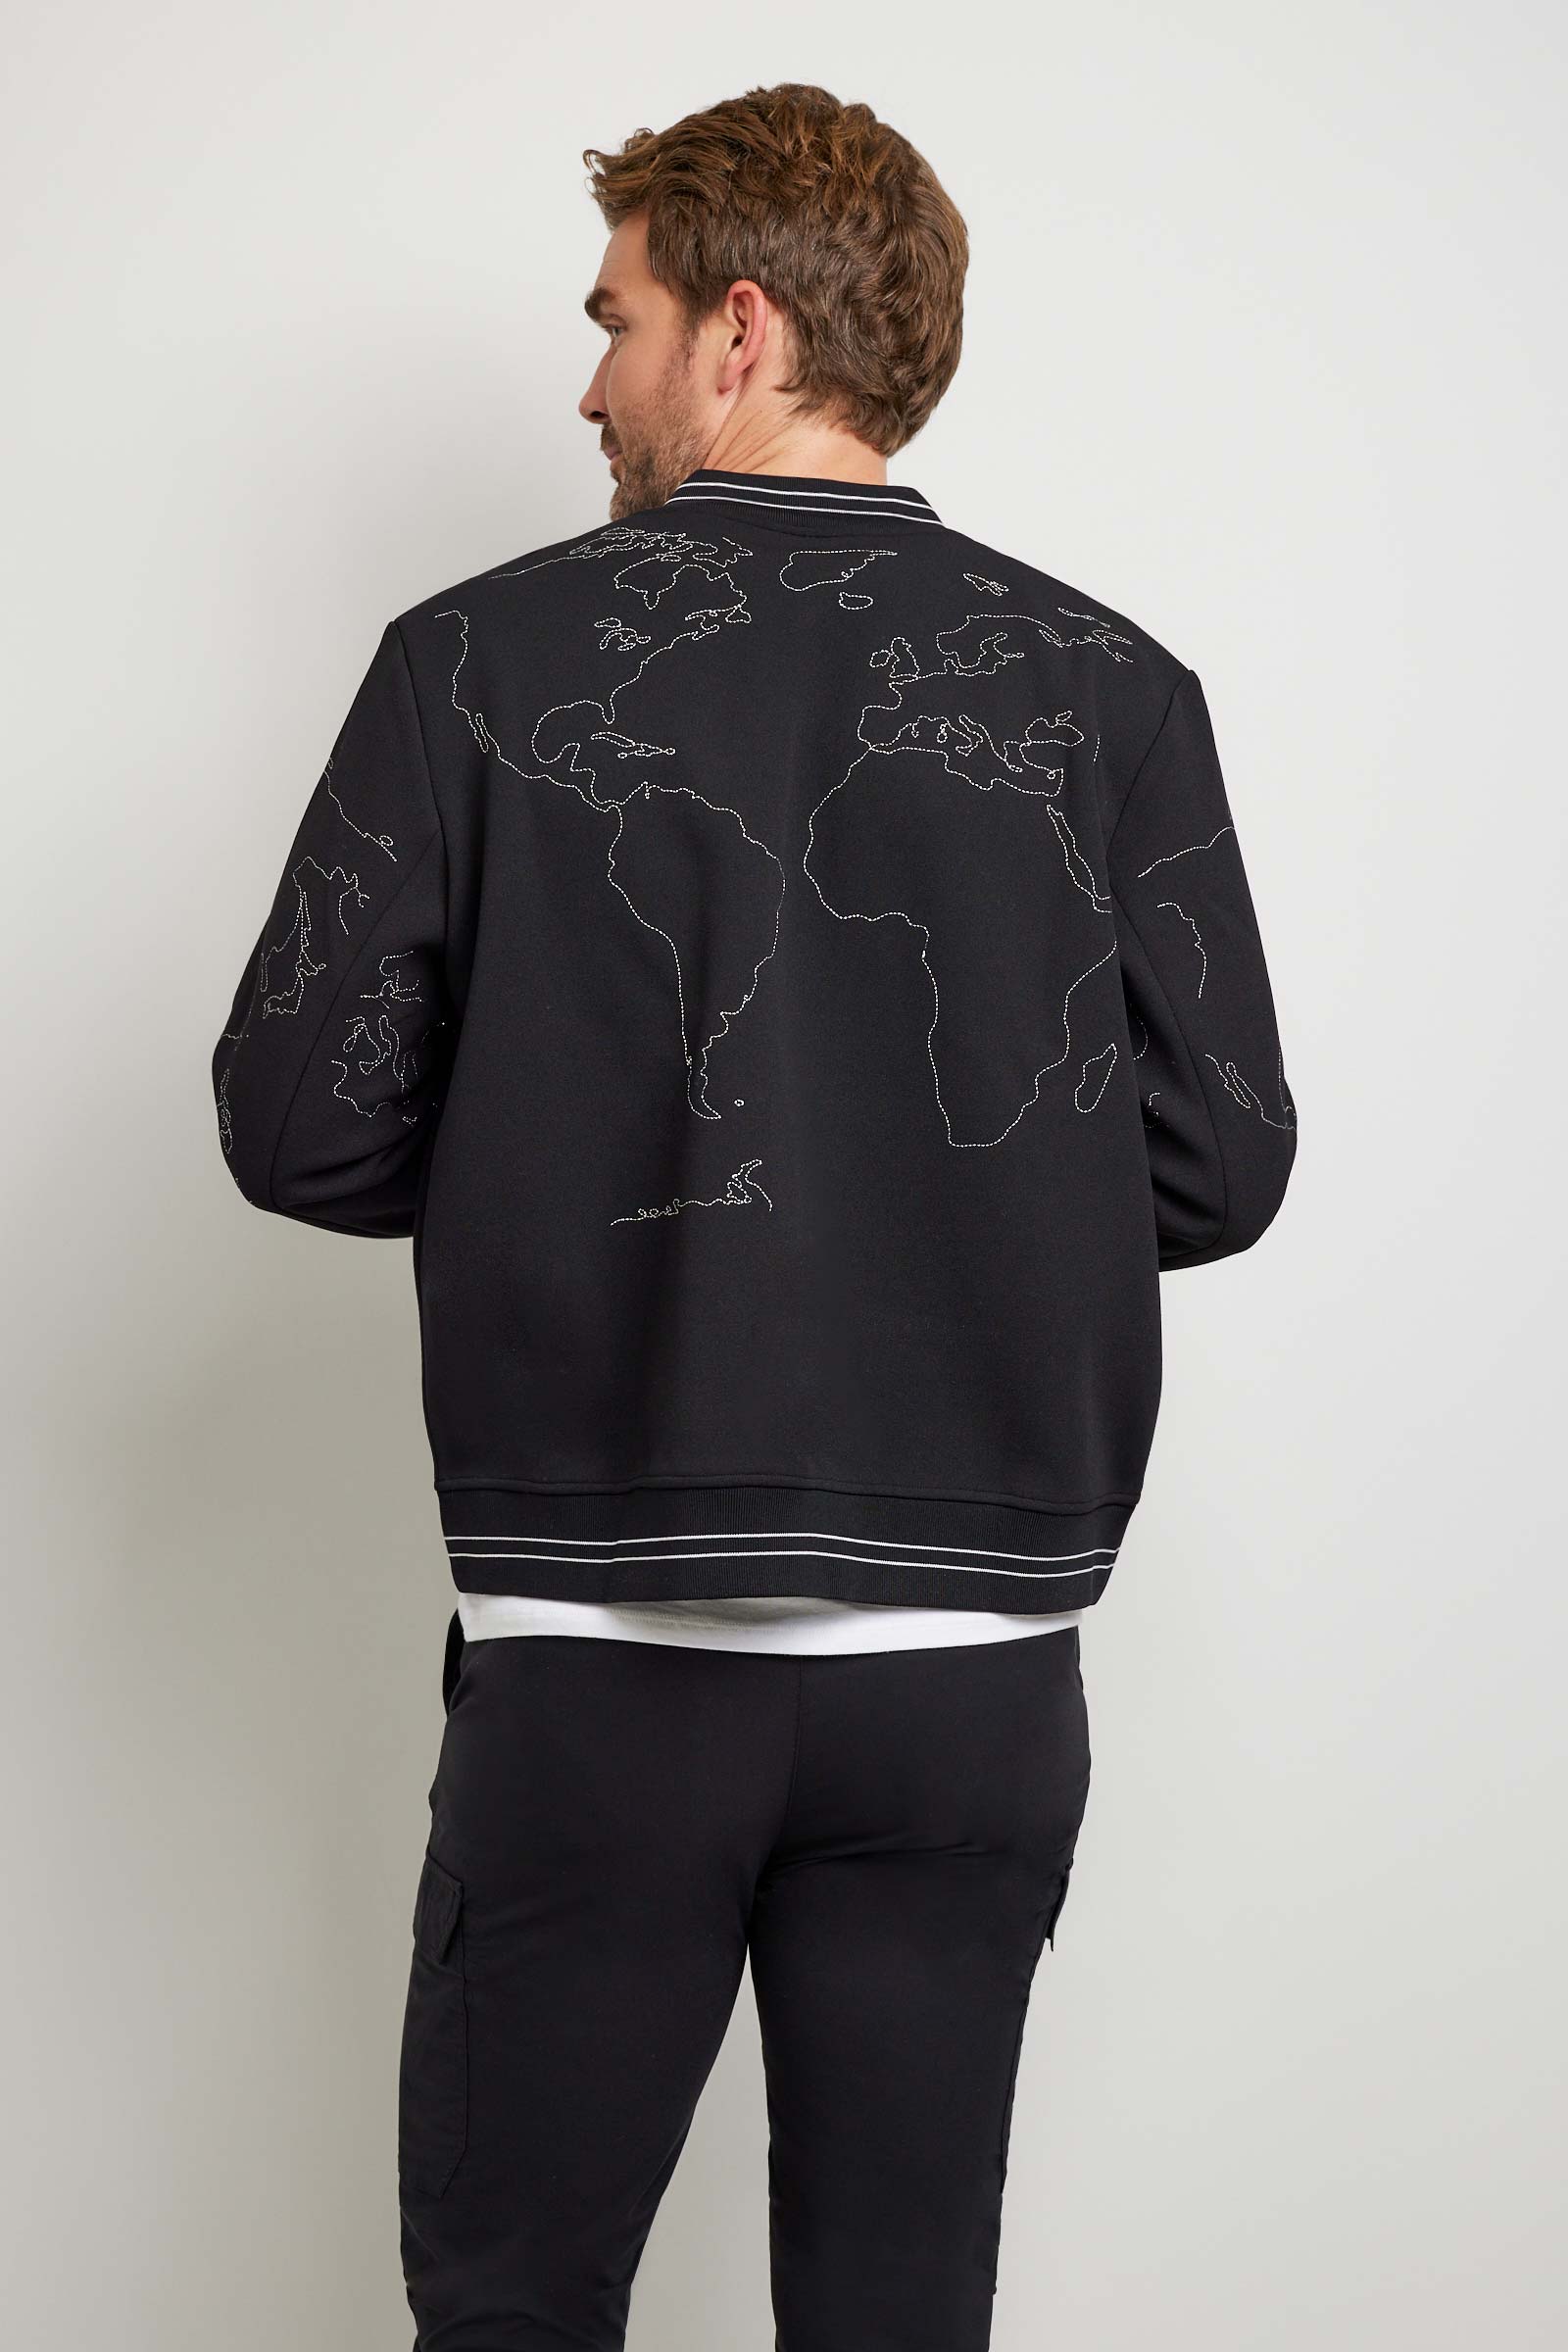 The Best Travel Jacket. Man Showing the Back Profile of a Map Bomber Jacket in Black.